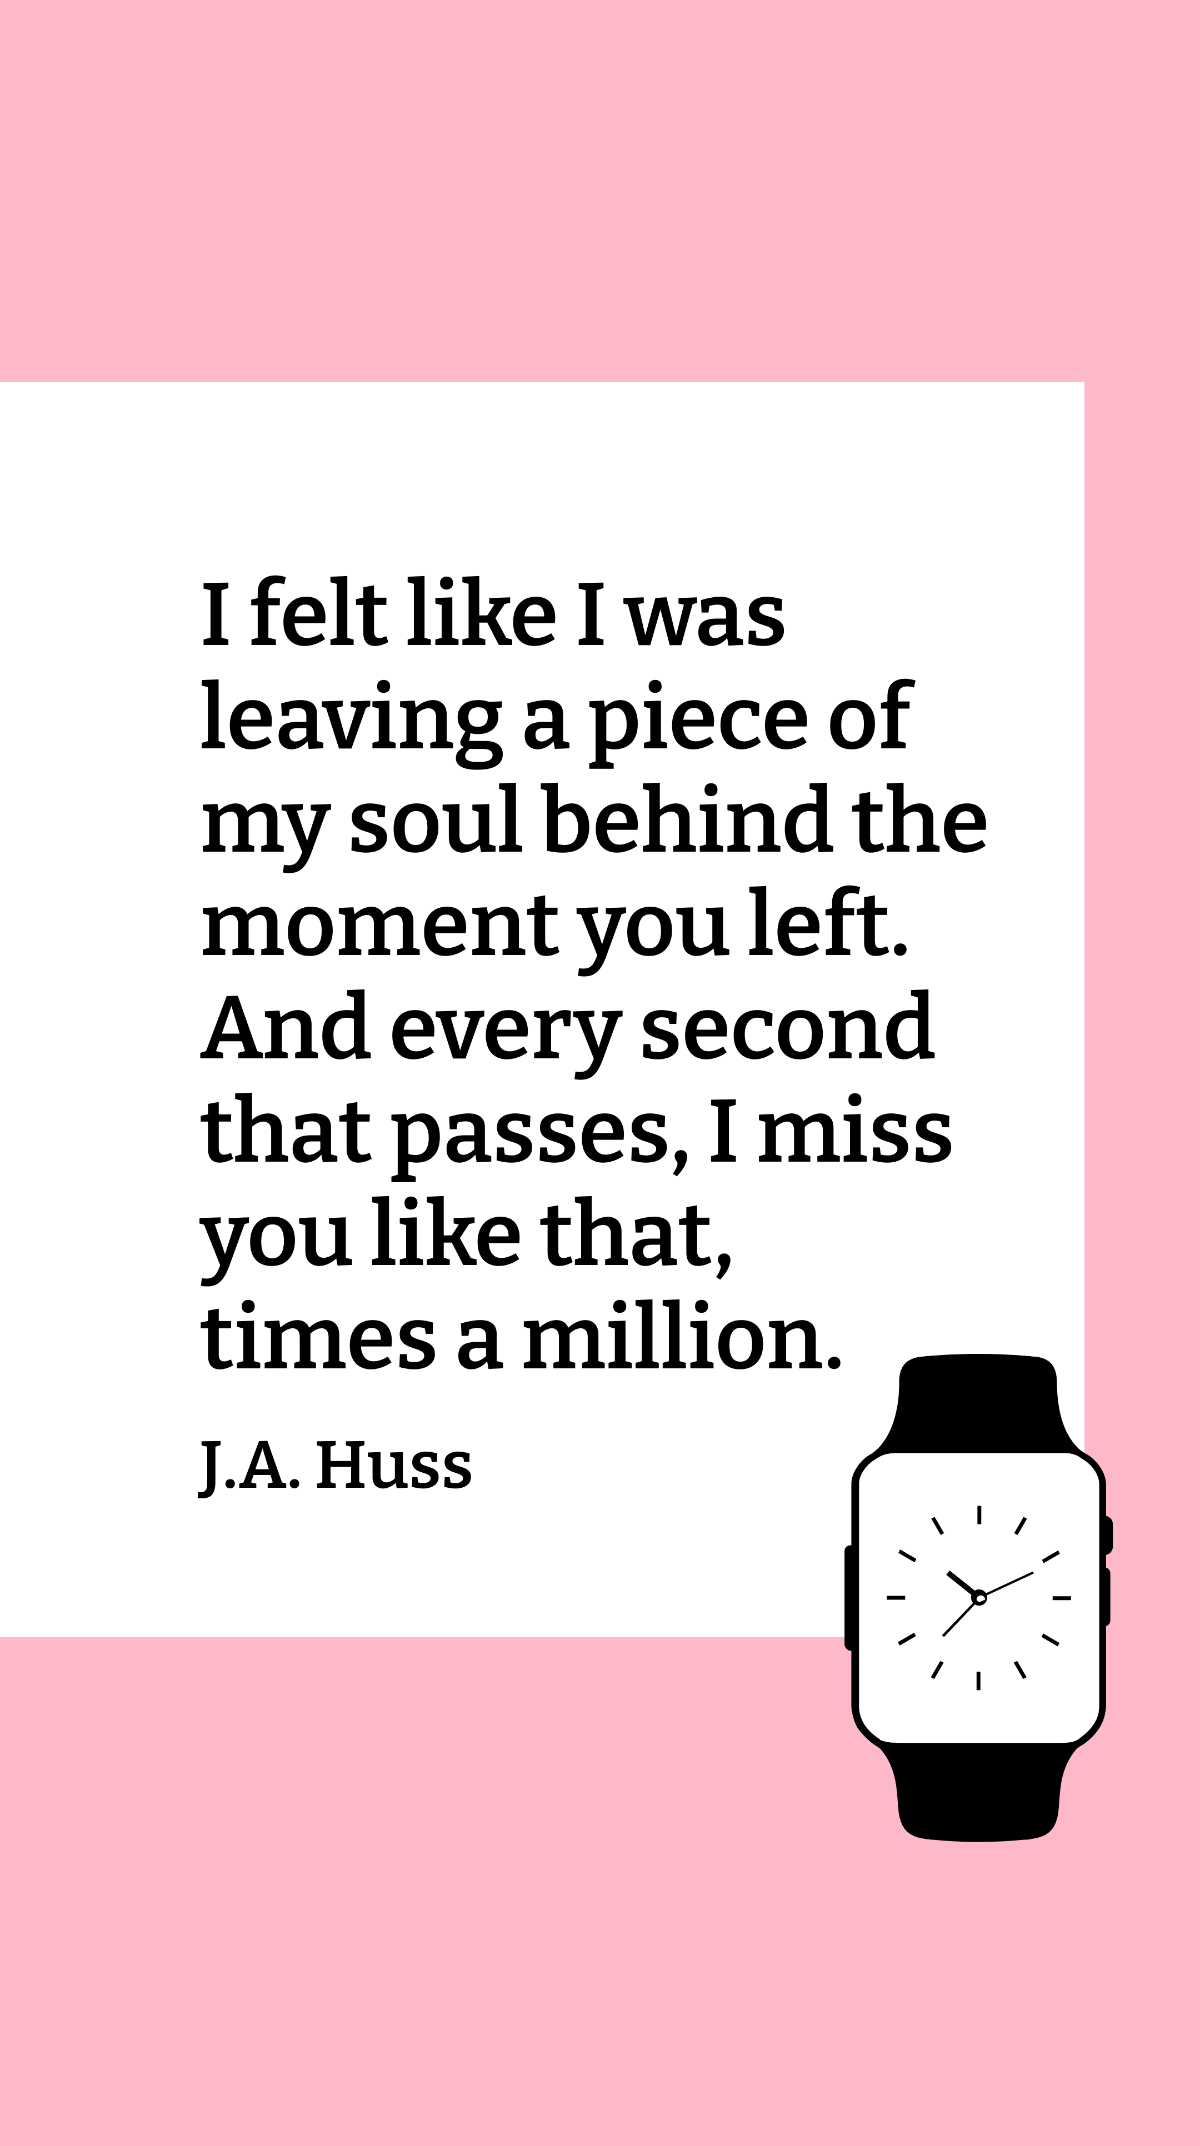 Free J.A. Huss - I felt like I was leaving a piece of my soul behind the moment you left. And every second that passes, I miss you like that, times a million. Template